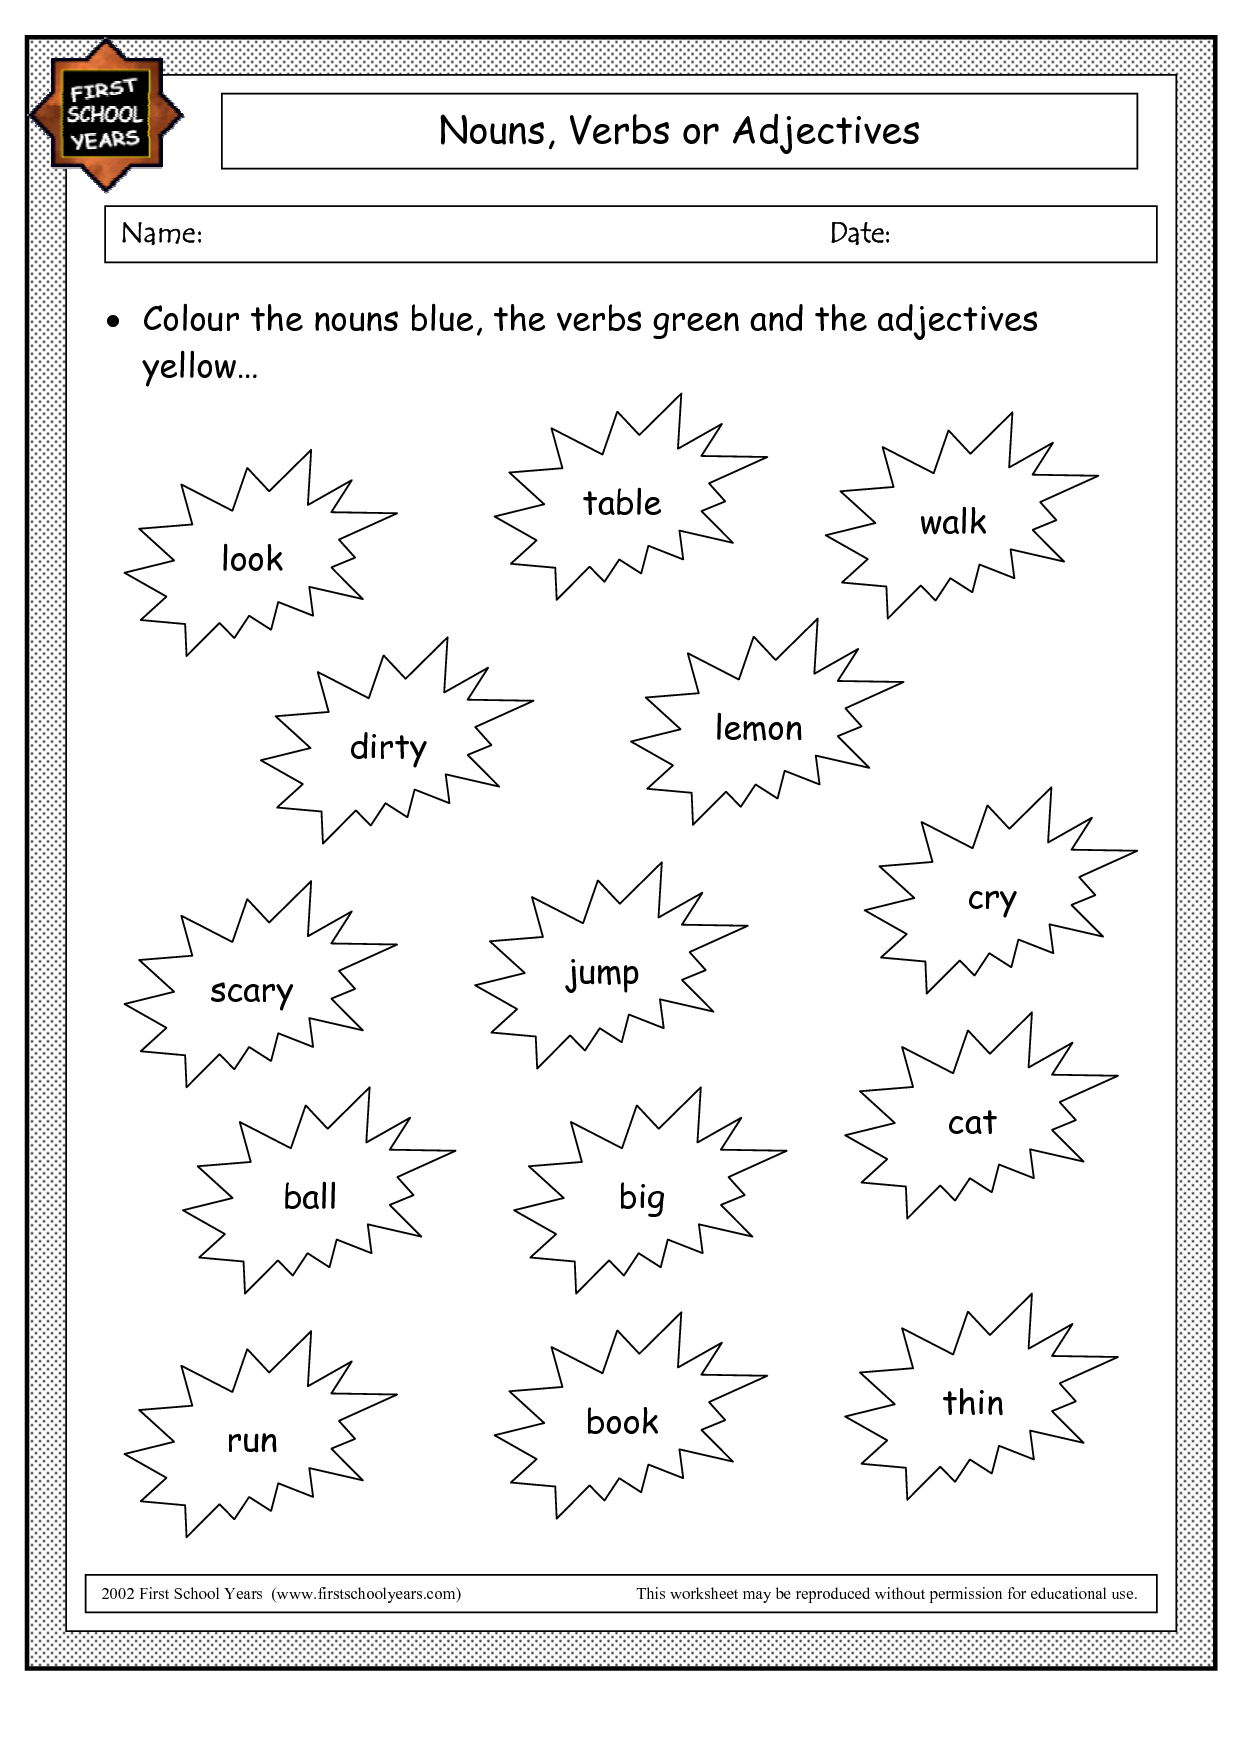 16-best-images-of-verbs-and-adverbs-worksheets-adverbs-and-adjectives-printable-worksheets